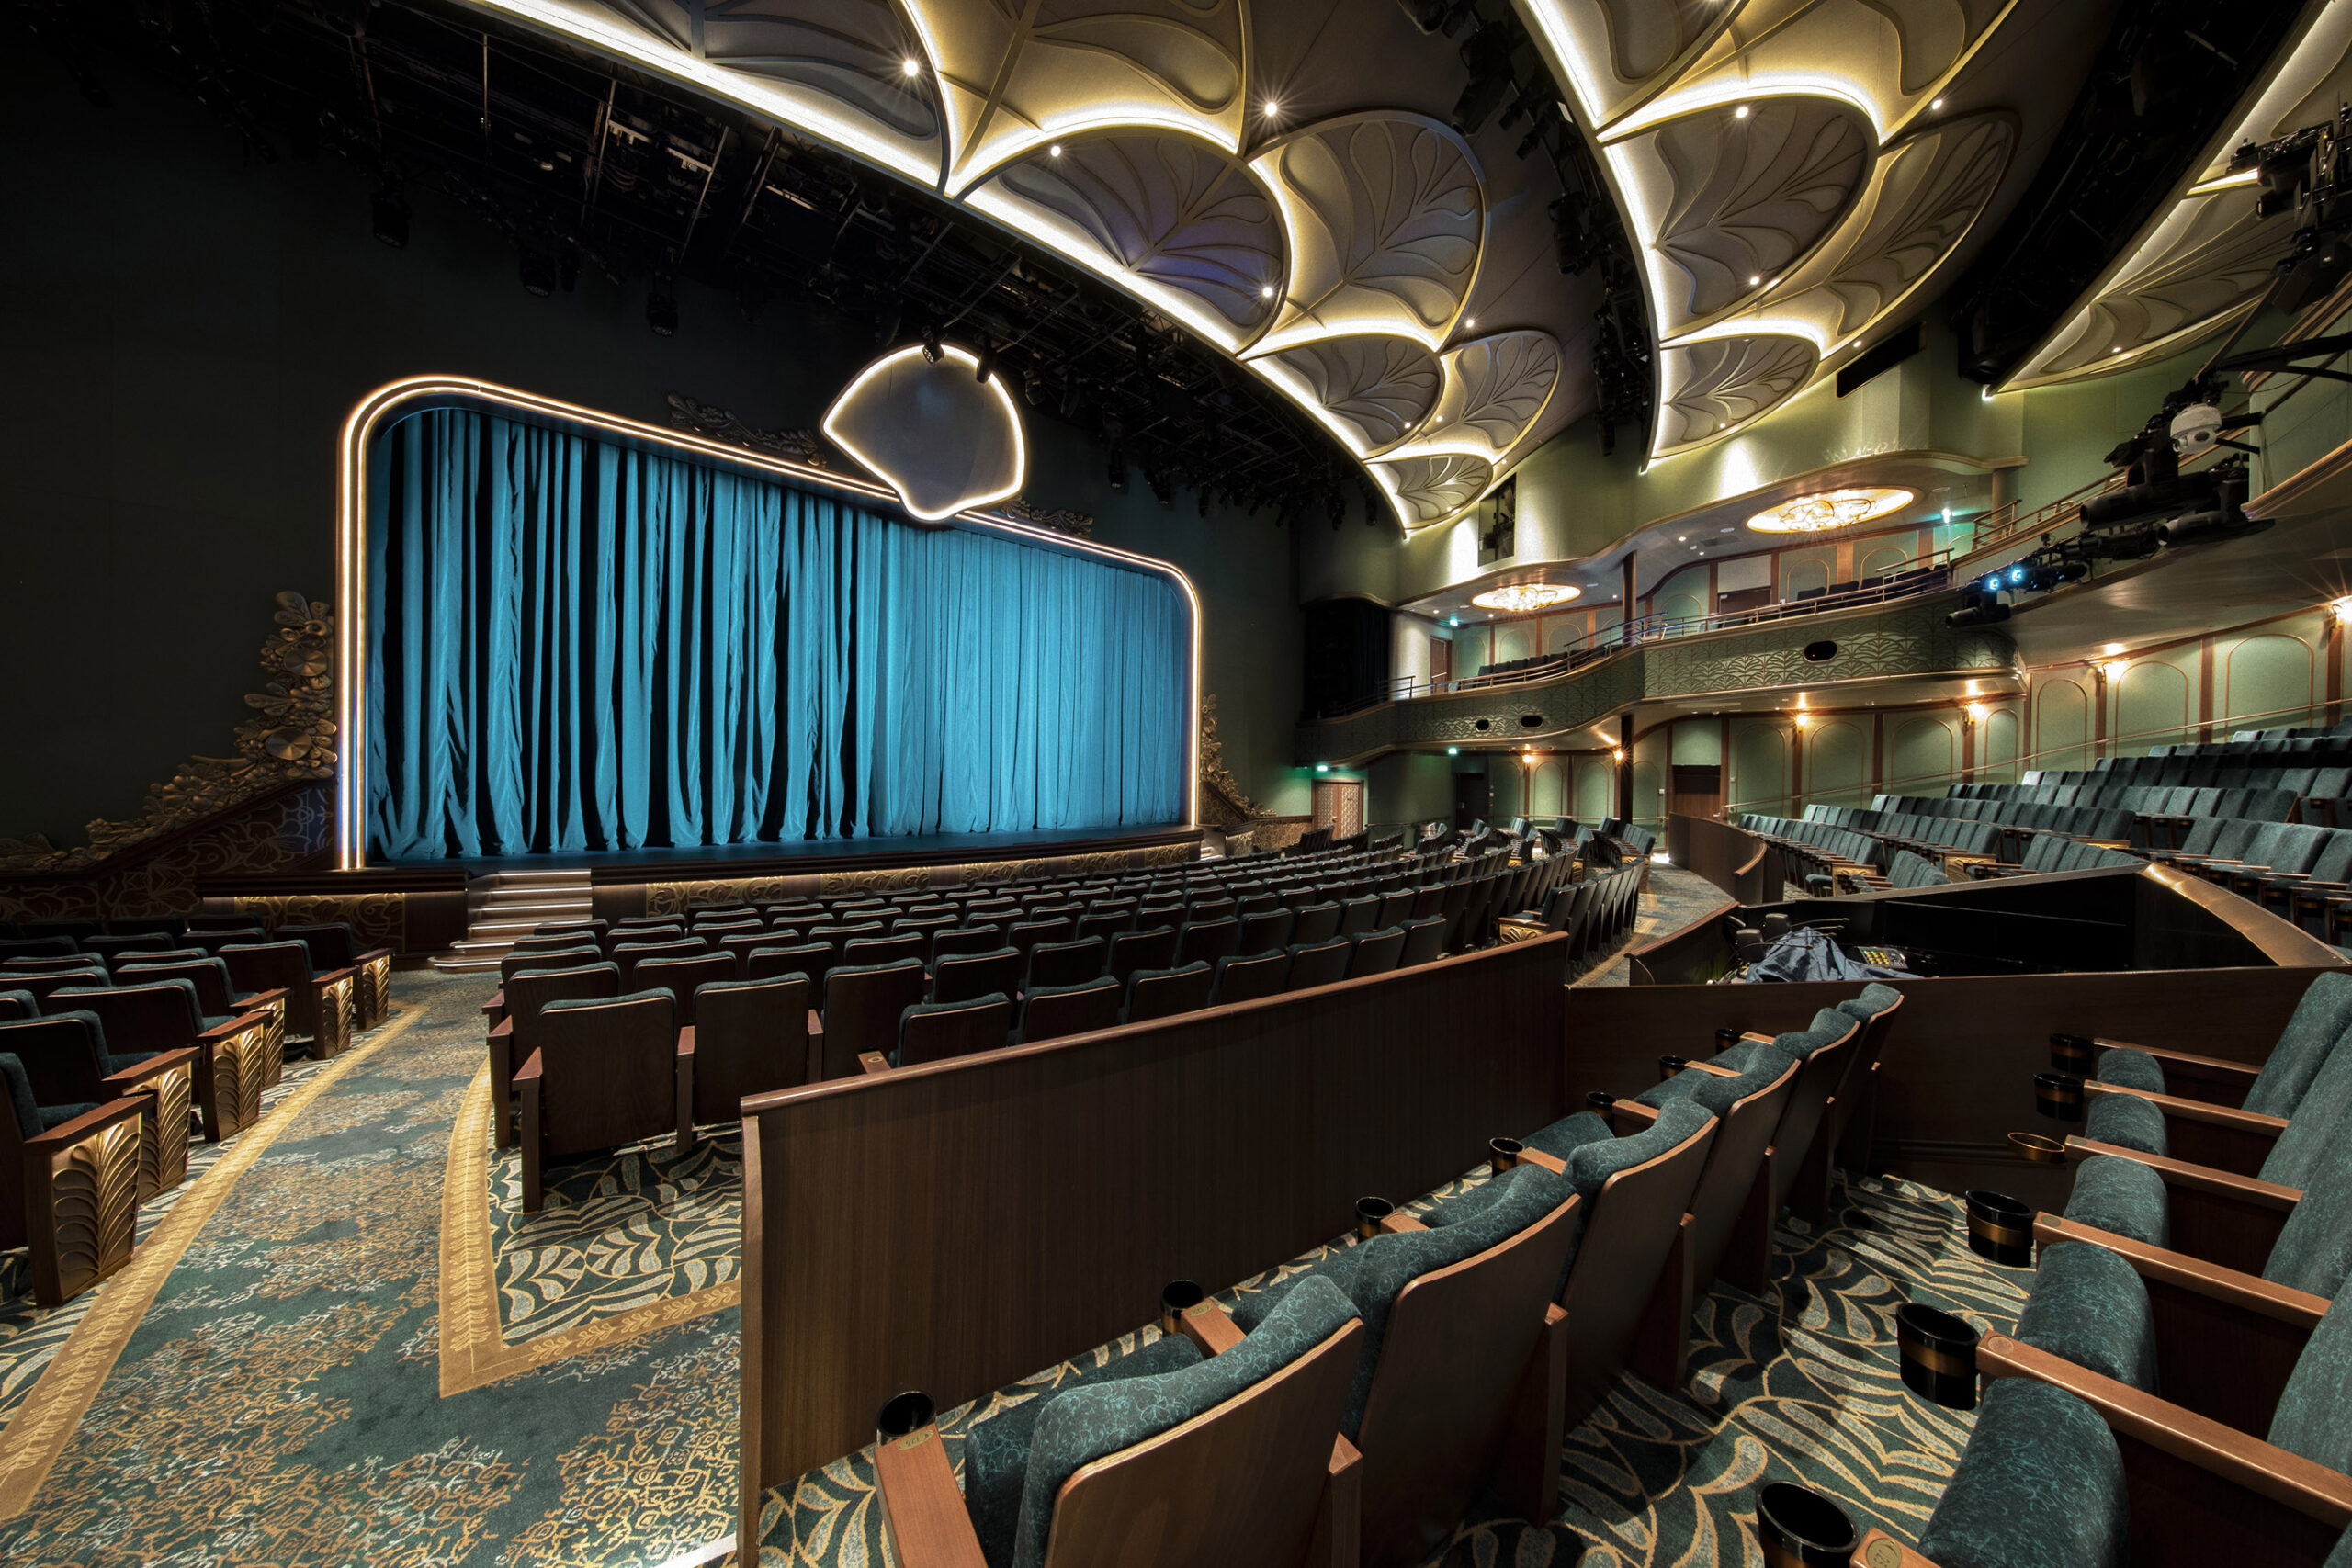 On the Disney Treasure, The Walt Disney Theatre will be an opulent show palace that comes alive with original Broadway-style productions developed exclusively for Disney Cruise Line by world-class creative teams. “Beauty and the Beast,” the fan-favorite Broadway-style musical, and “Disney Seas the Adventure,” an original musical spectacular, will take stage at the Walt Disney Theatre aboard Disney Treasure voyages. (Disney)